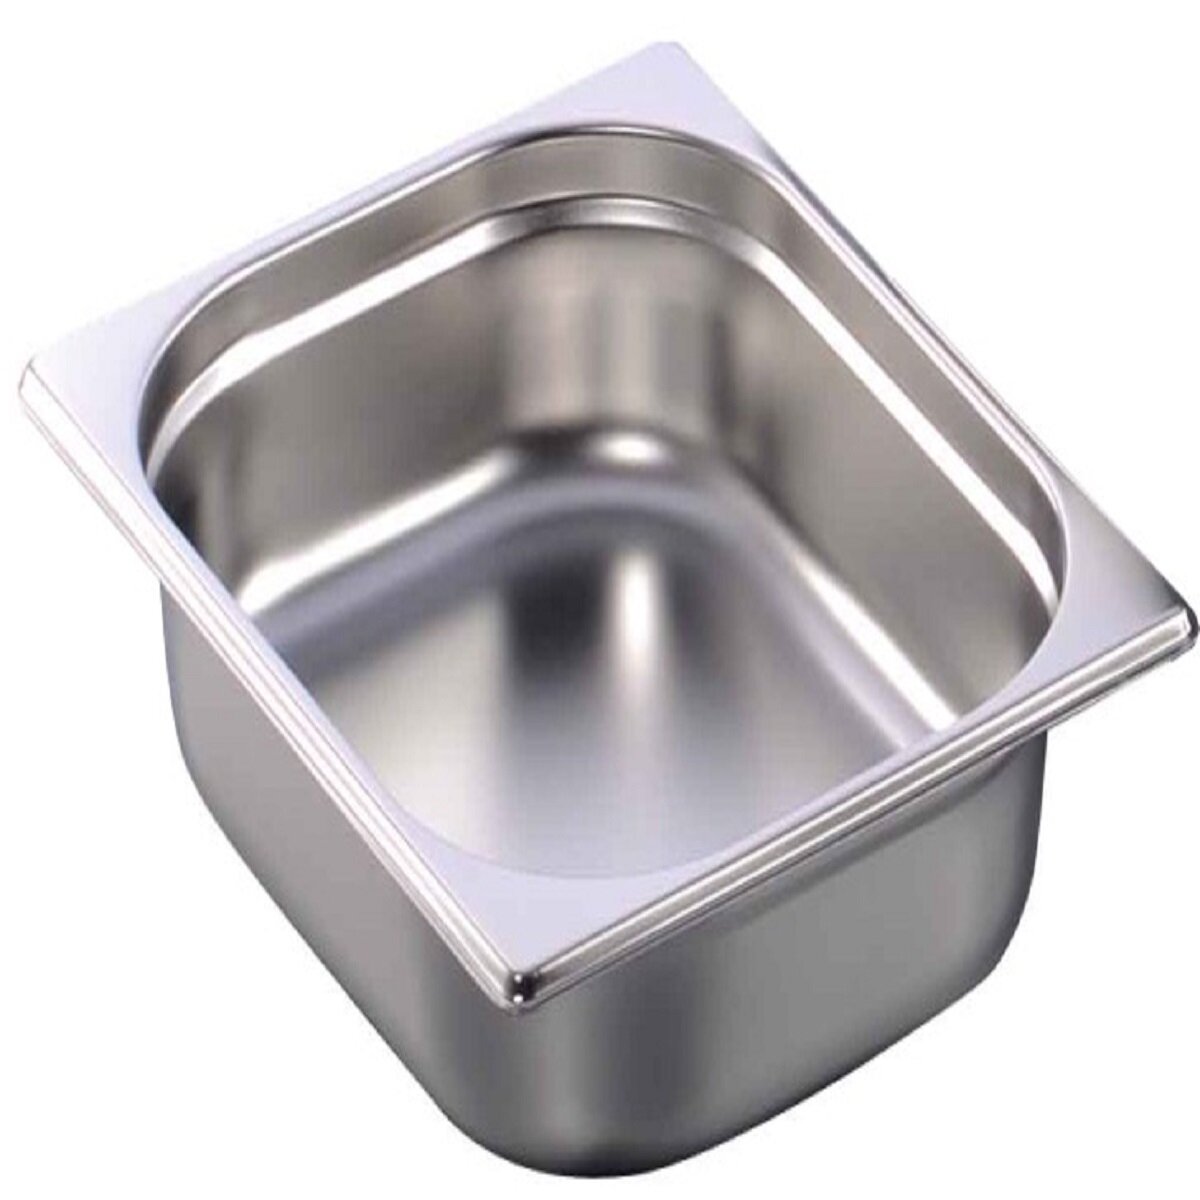 301030 - Stainless Steel Gastronorm Pan GN 1/2 Depth 20mm (1 box/12 units)